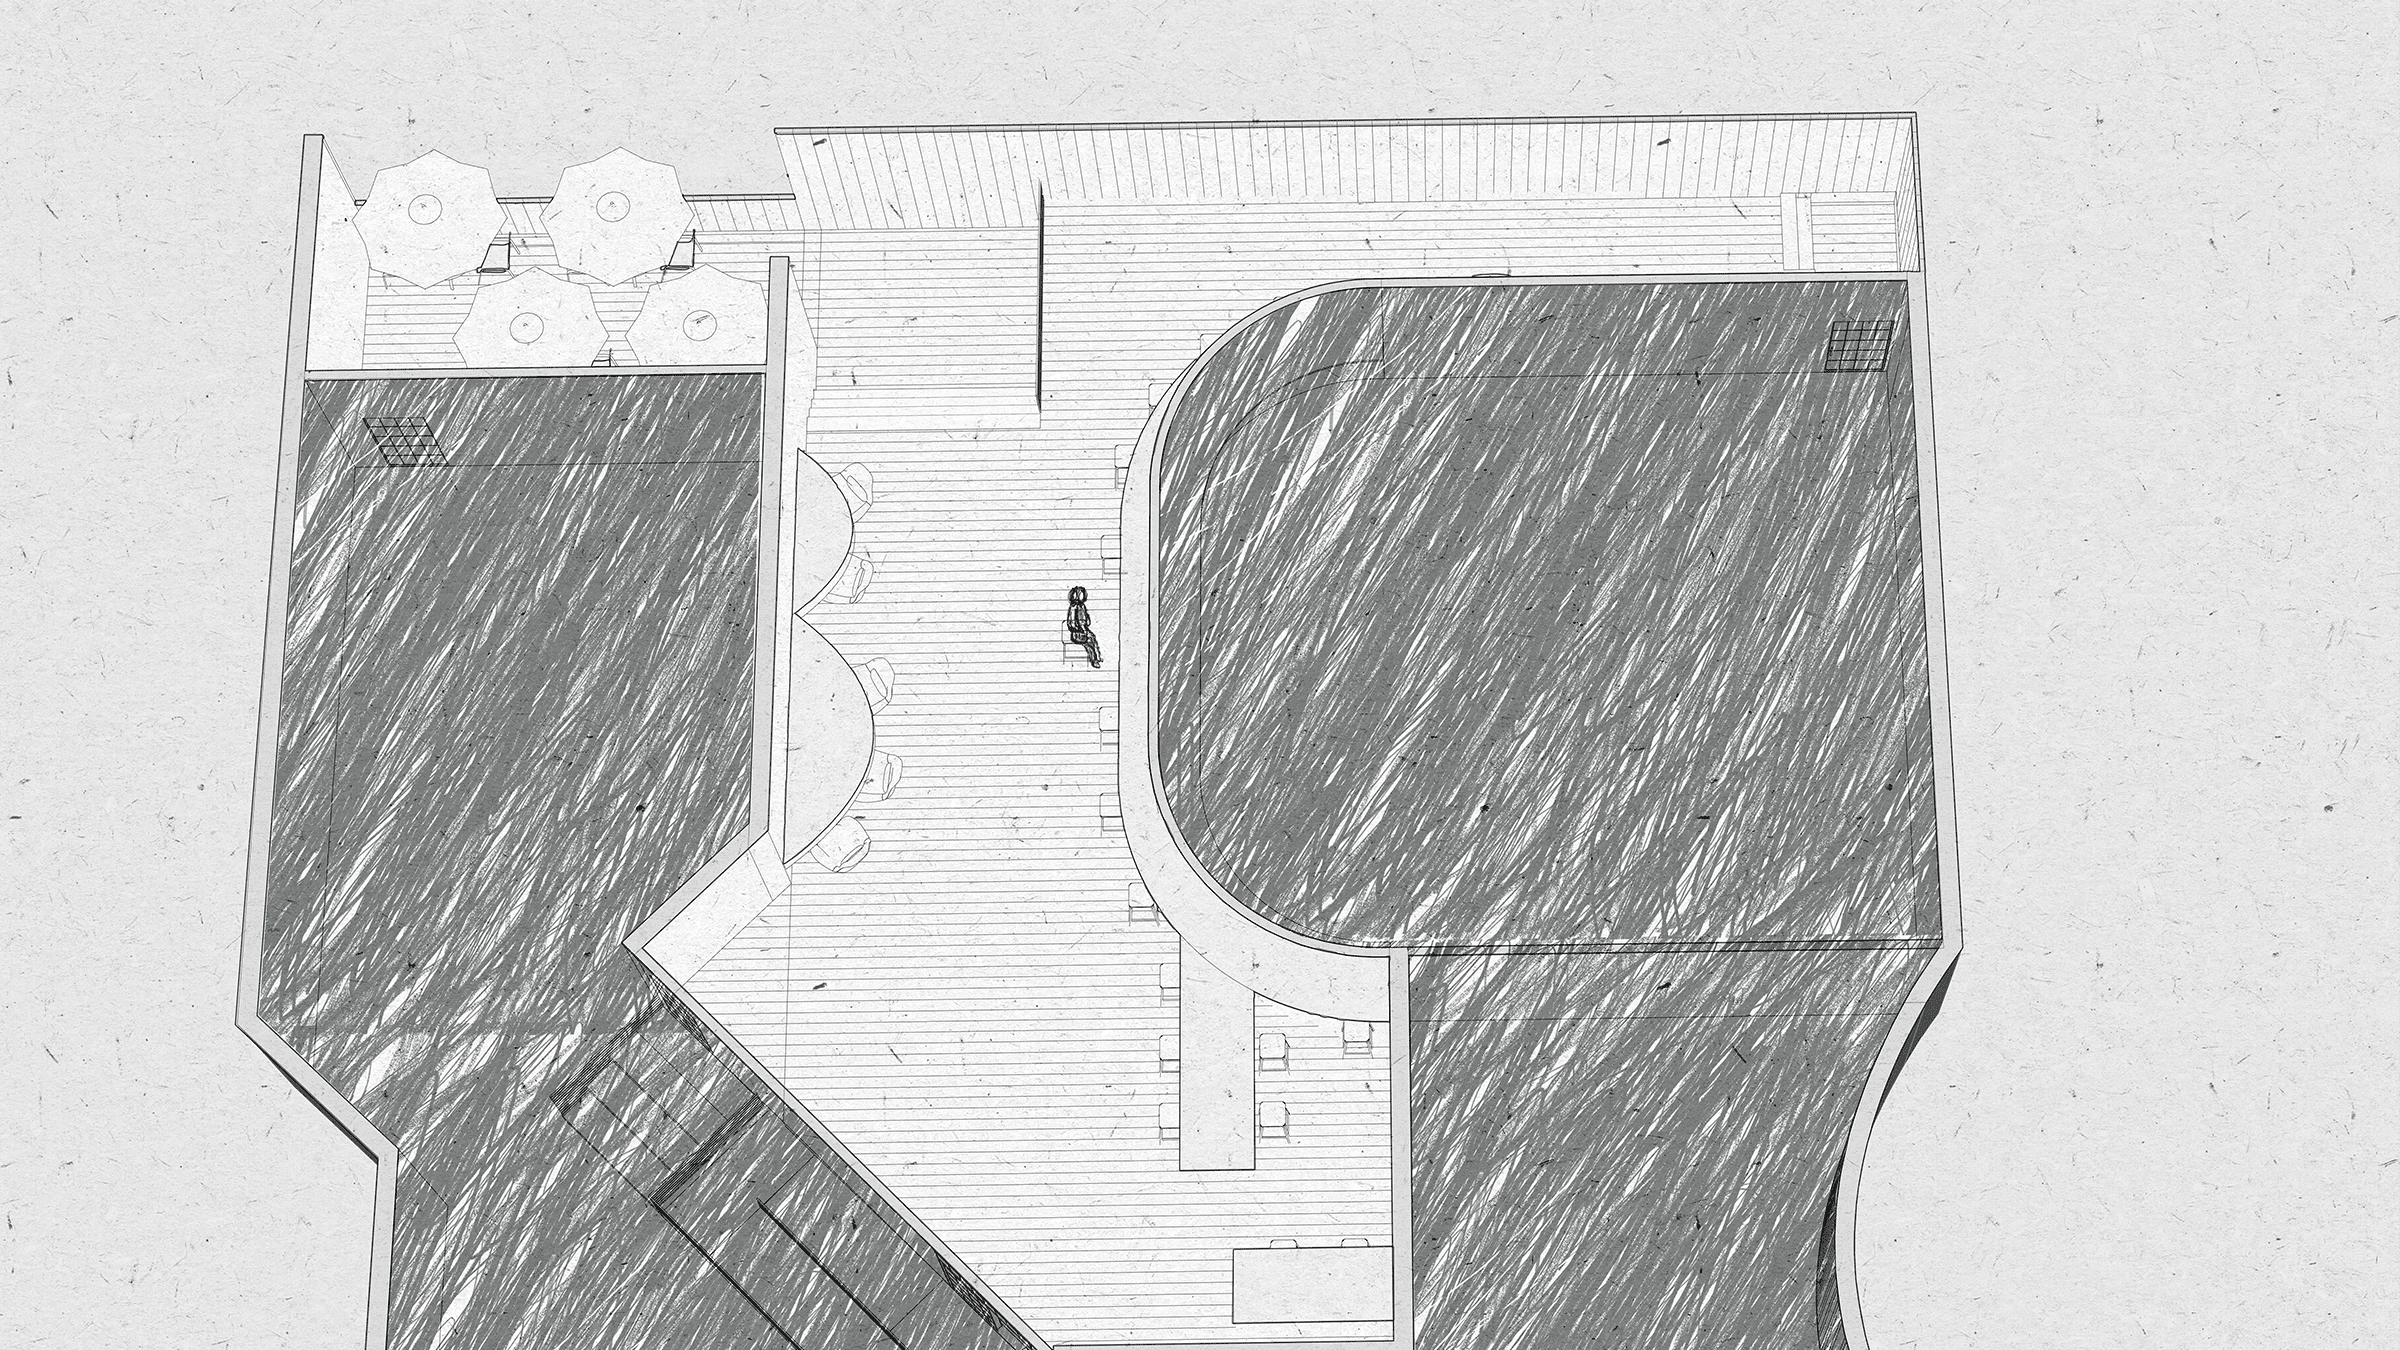 Top down view of drawn person sitting in building